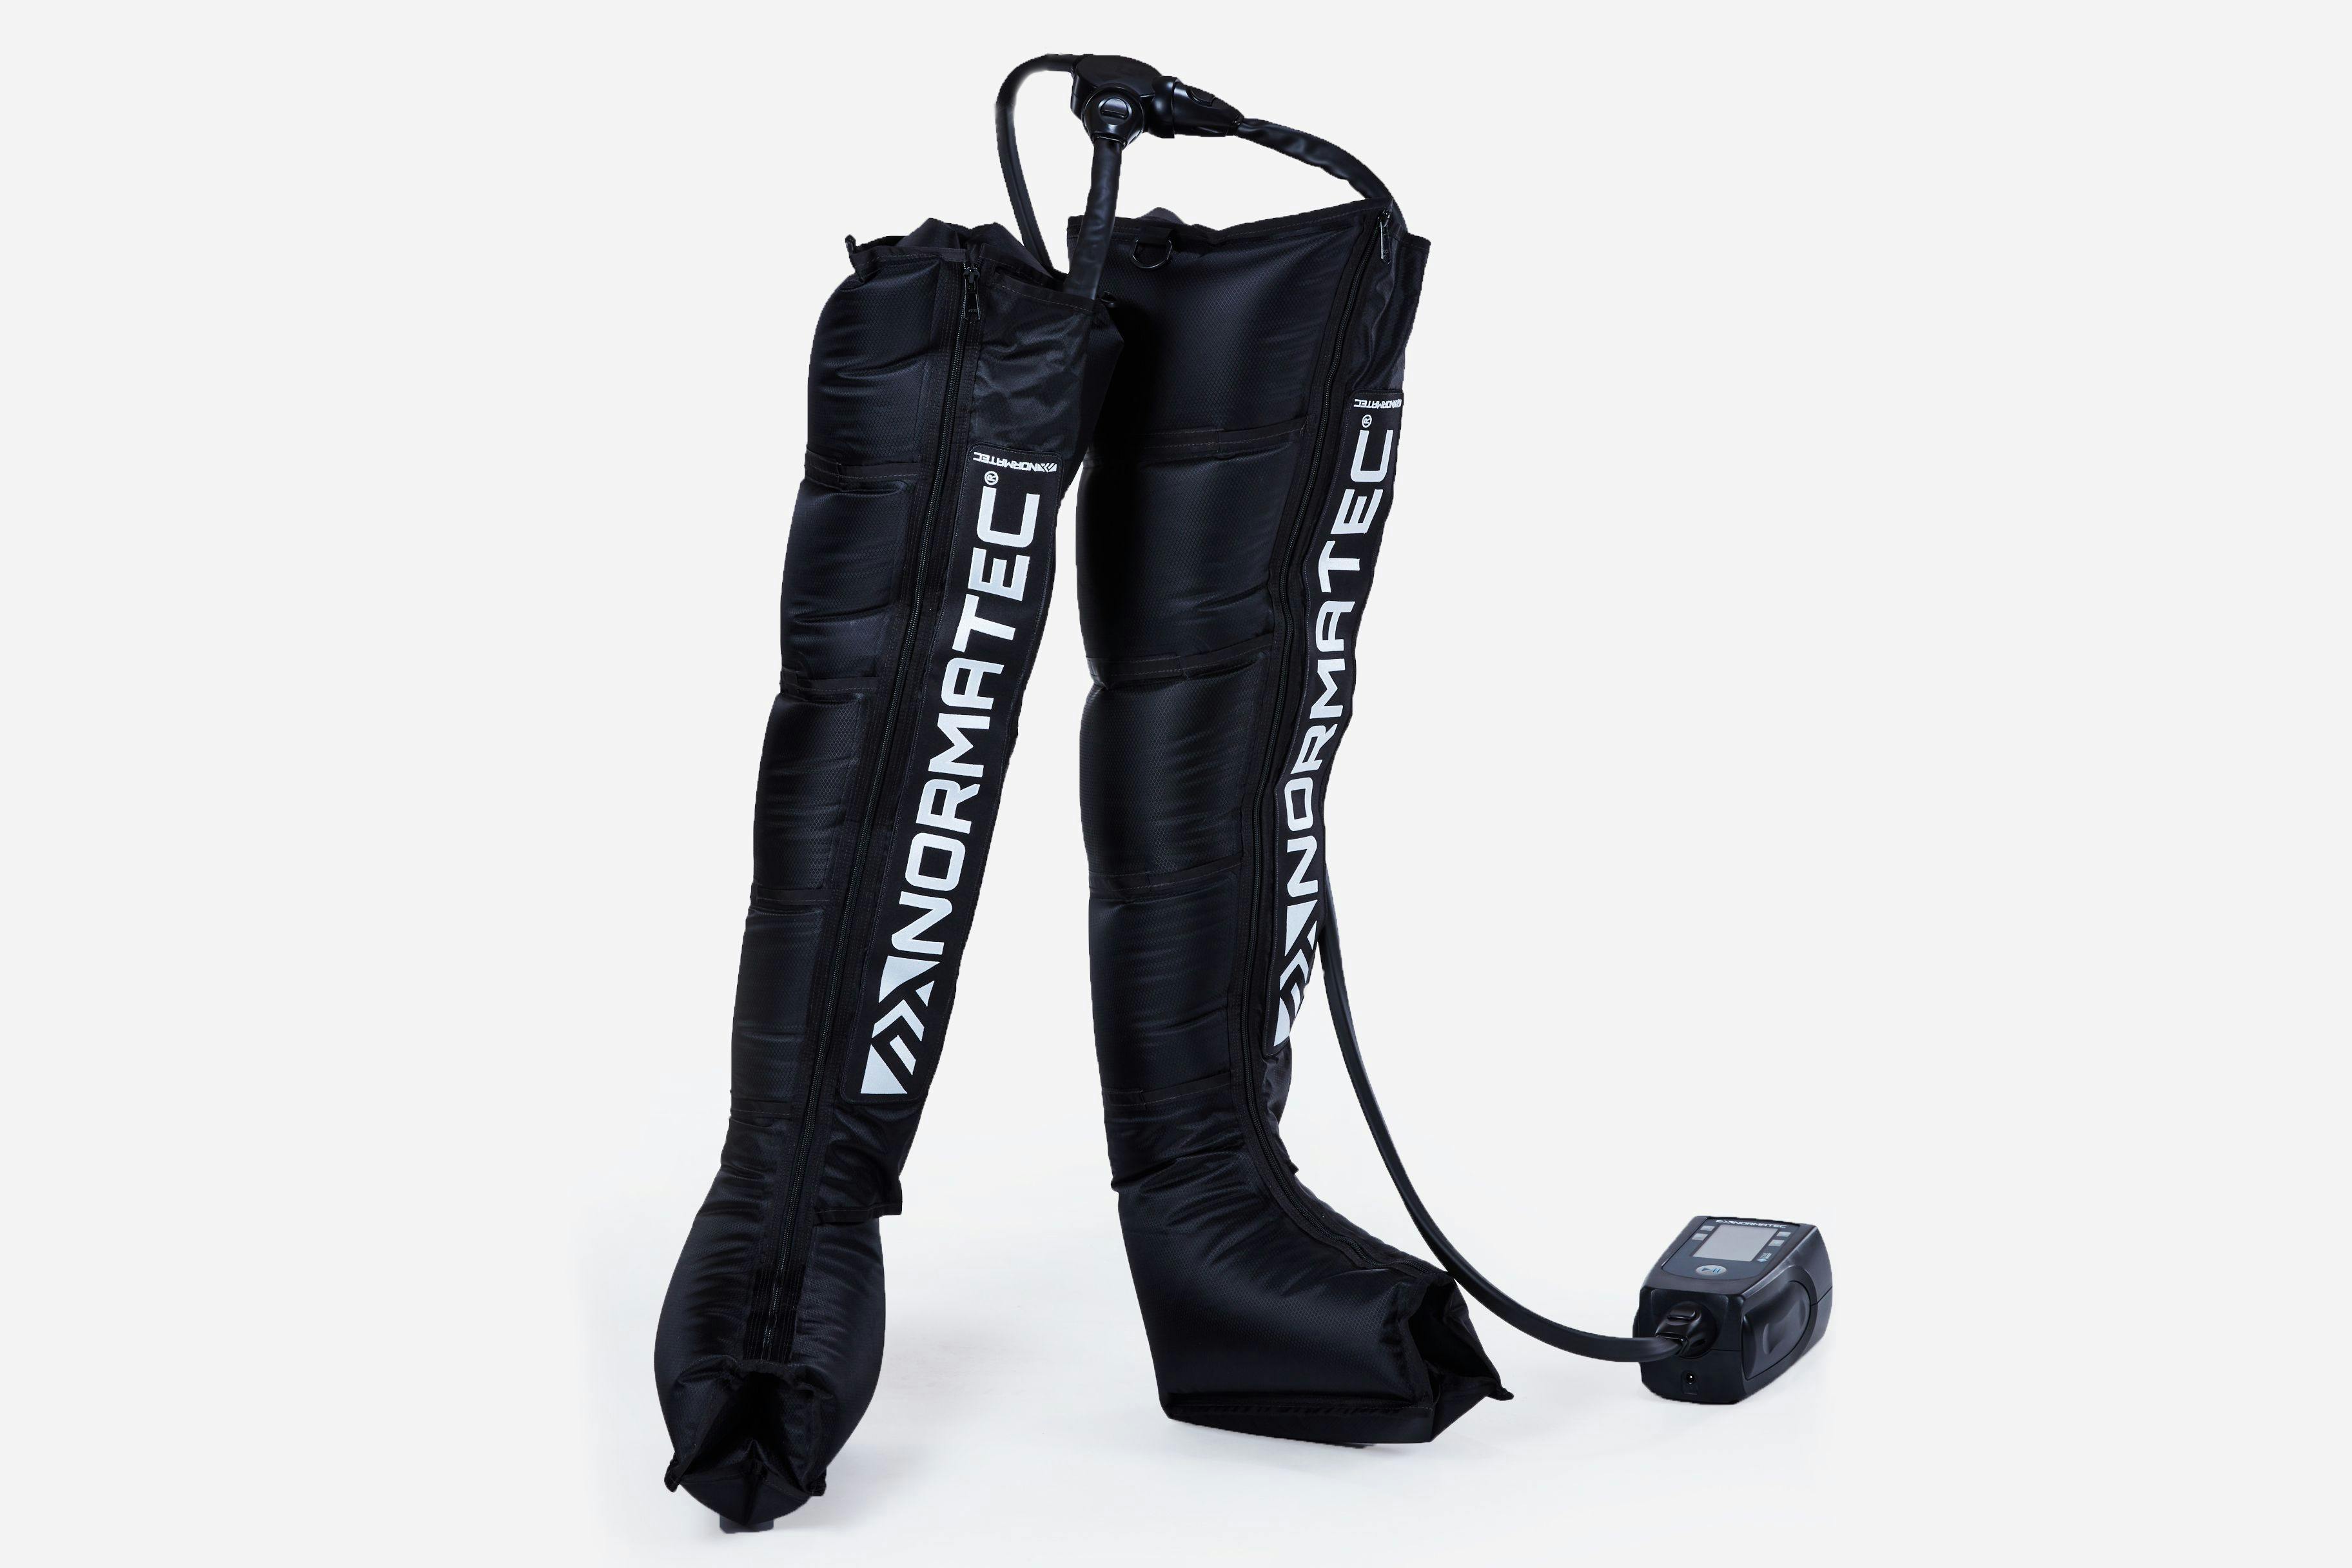 NORMATEC PULSE RECOVERY BOOTS - Β. & Ι. ΚΕΡΑΜΙΔΑΣ